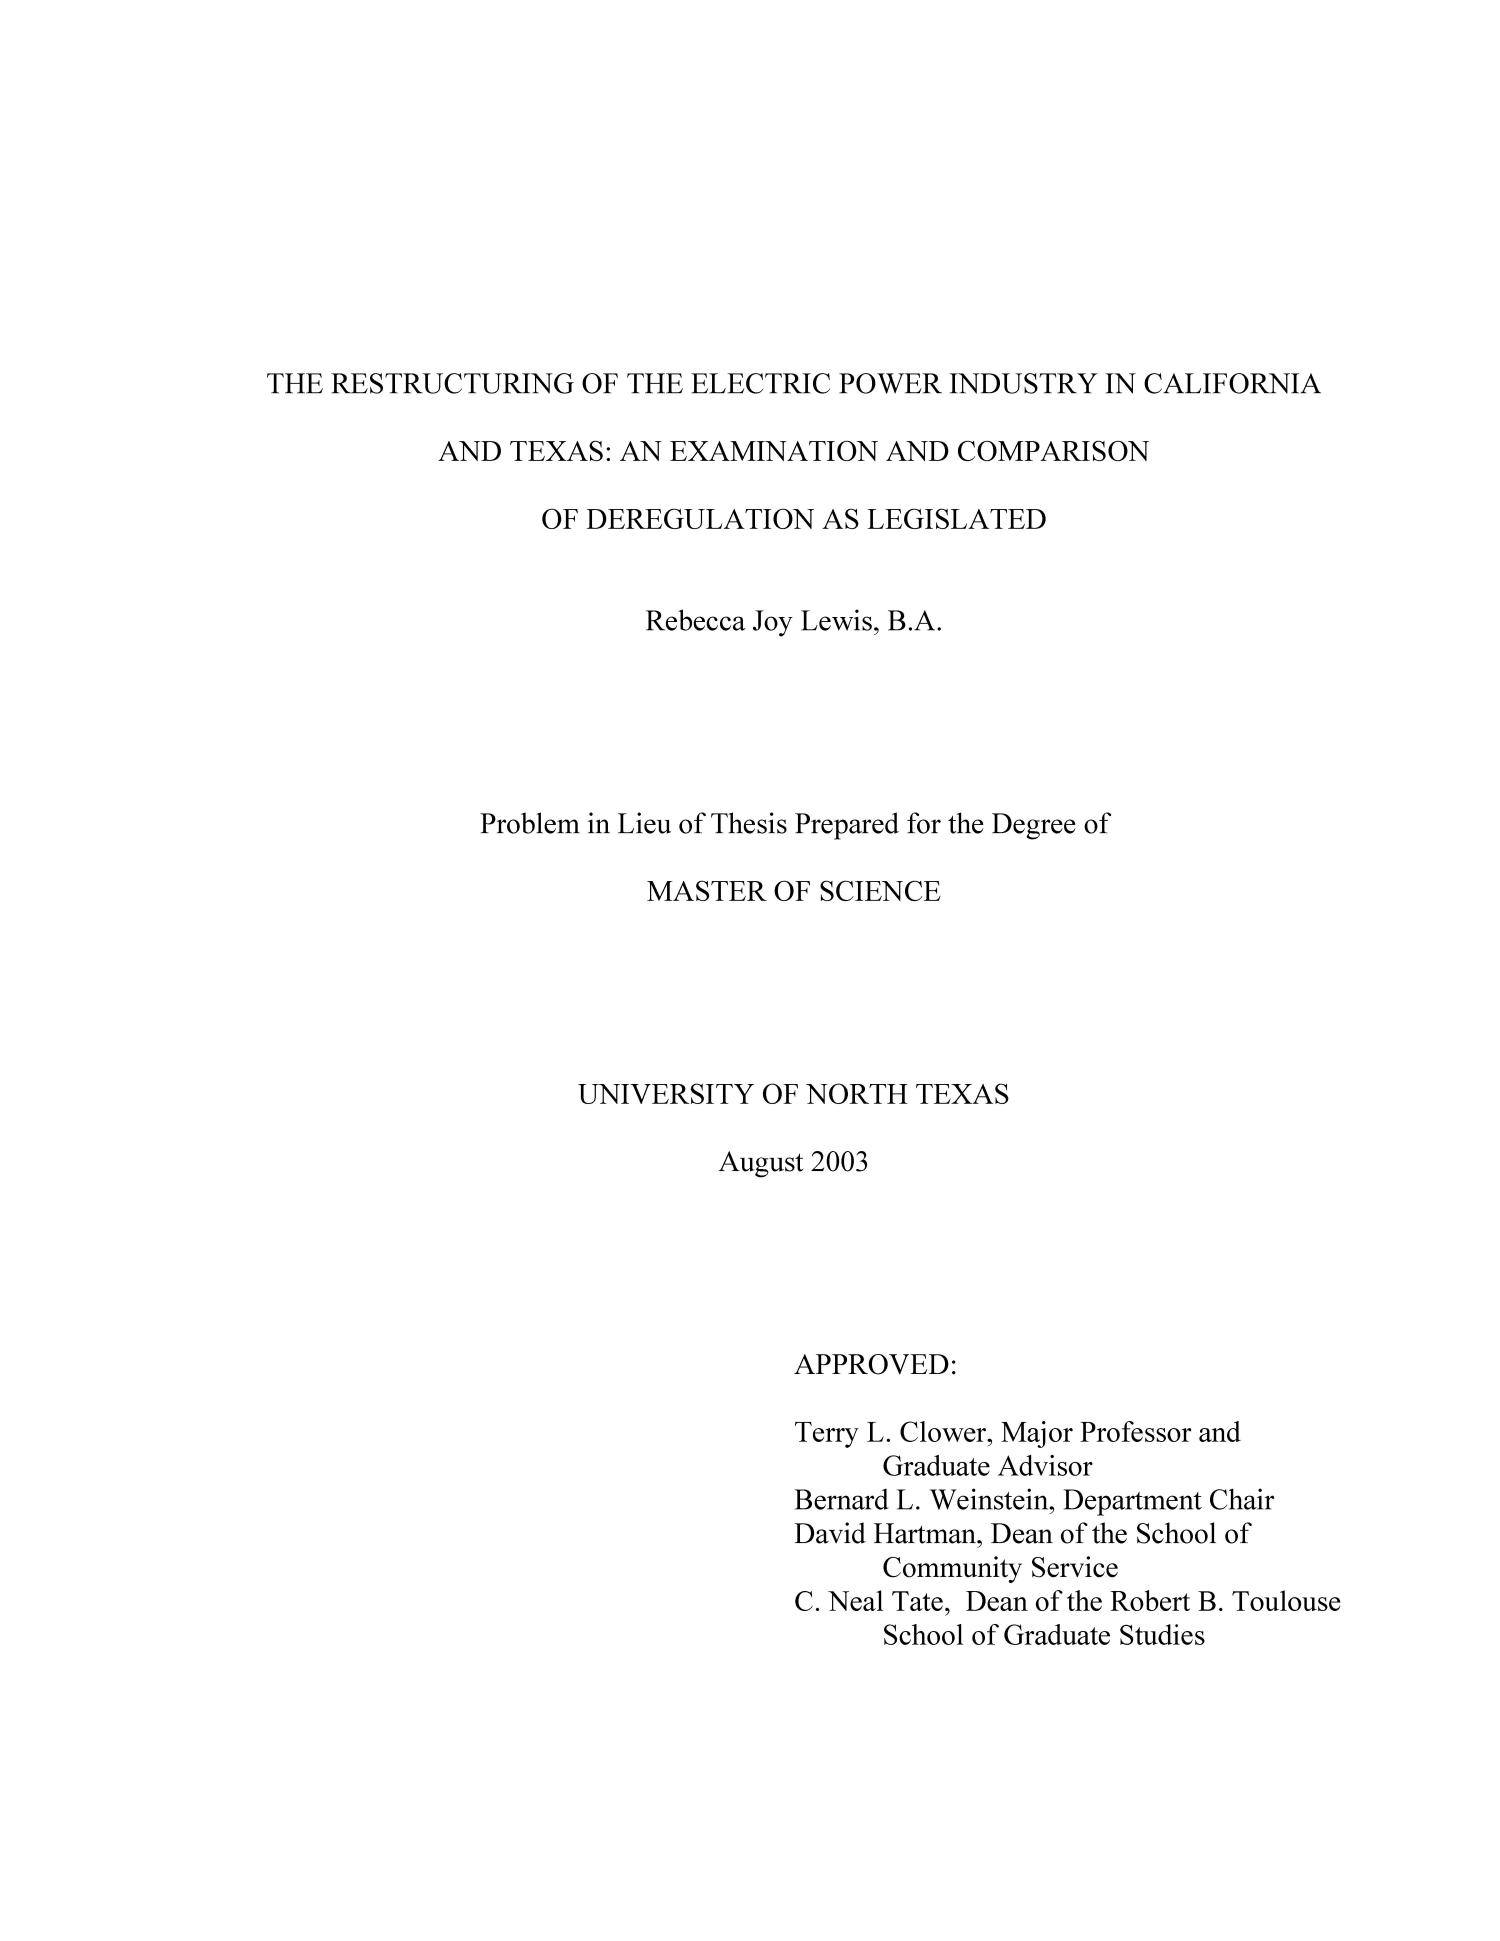 The Restructuring of the Electric Power Industry in California and in Texas: An Examination and Comparison of Deregulation as Legislated
                                                
                                                    Title Page
                                                